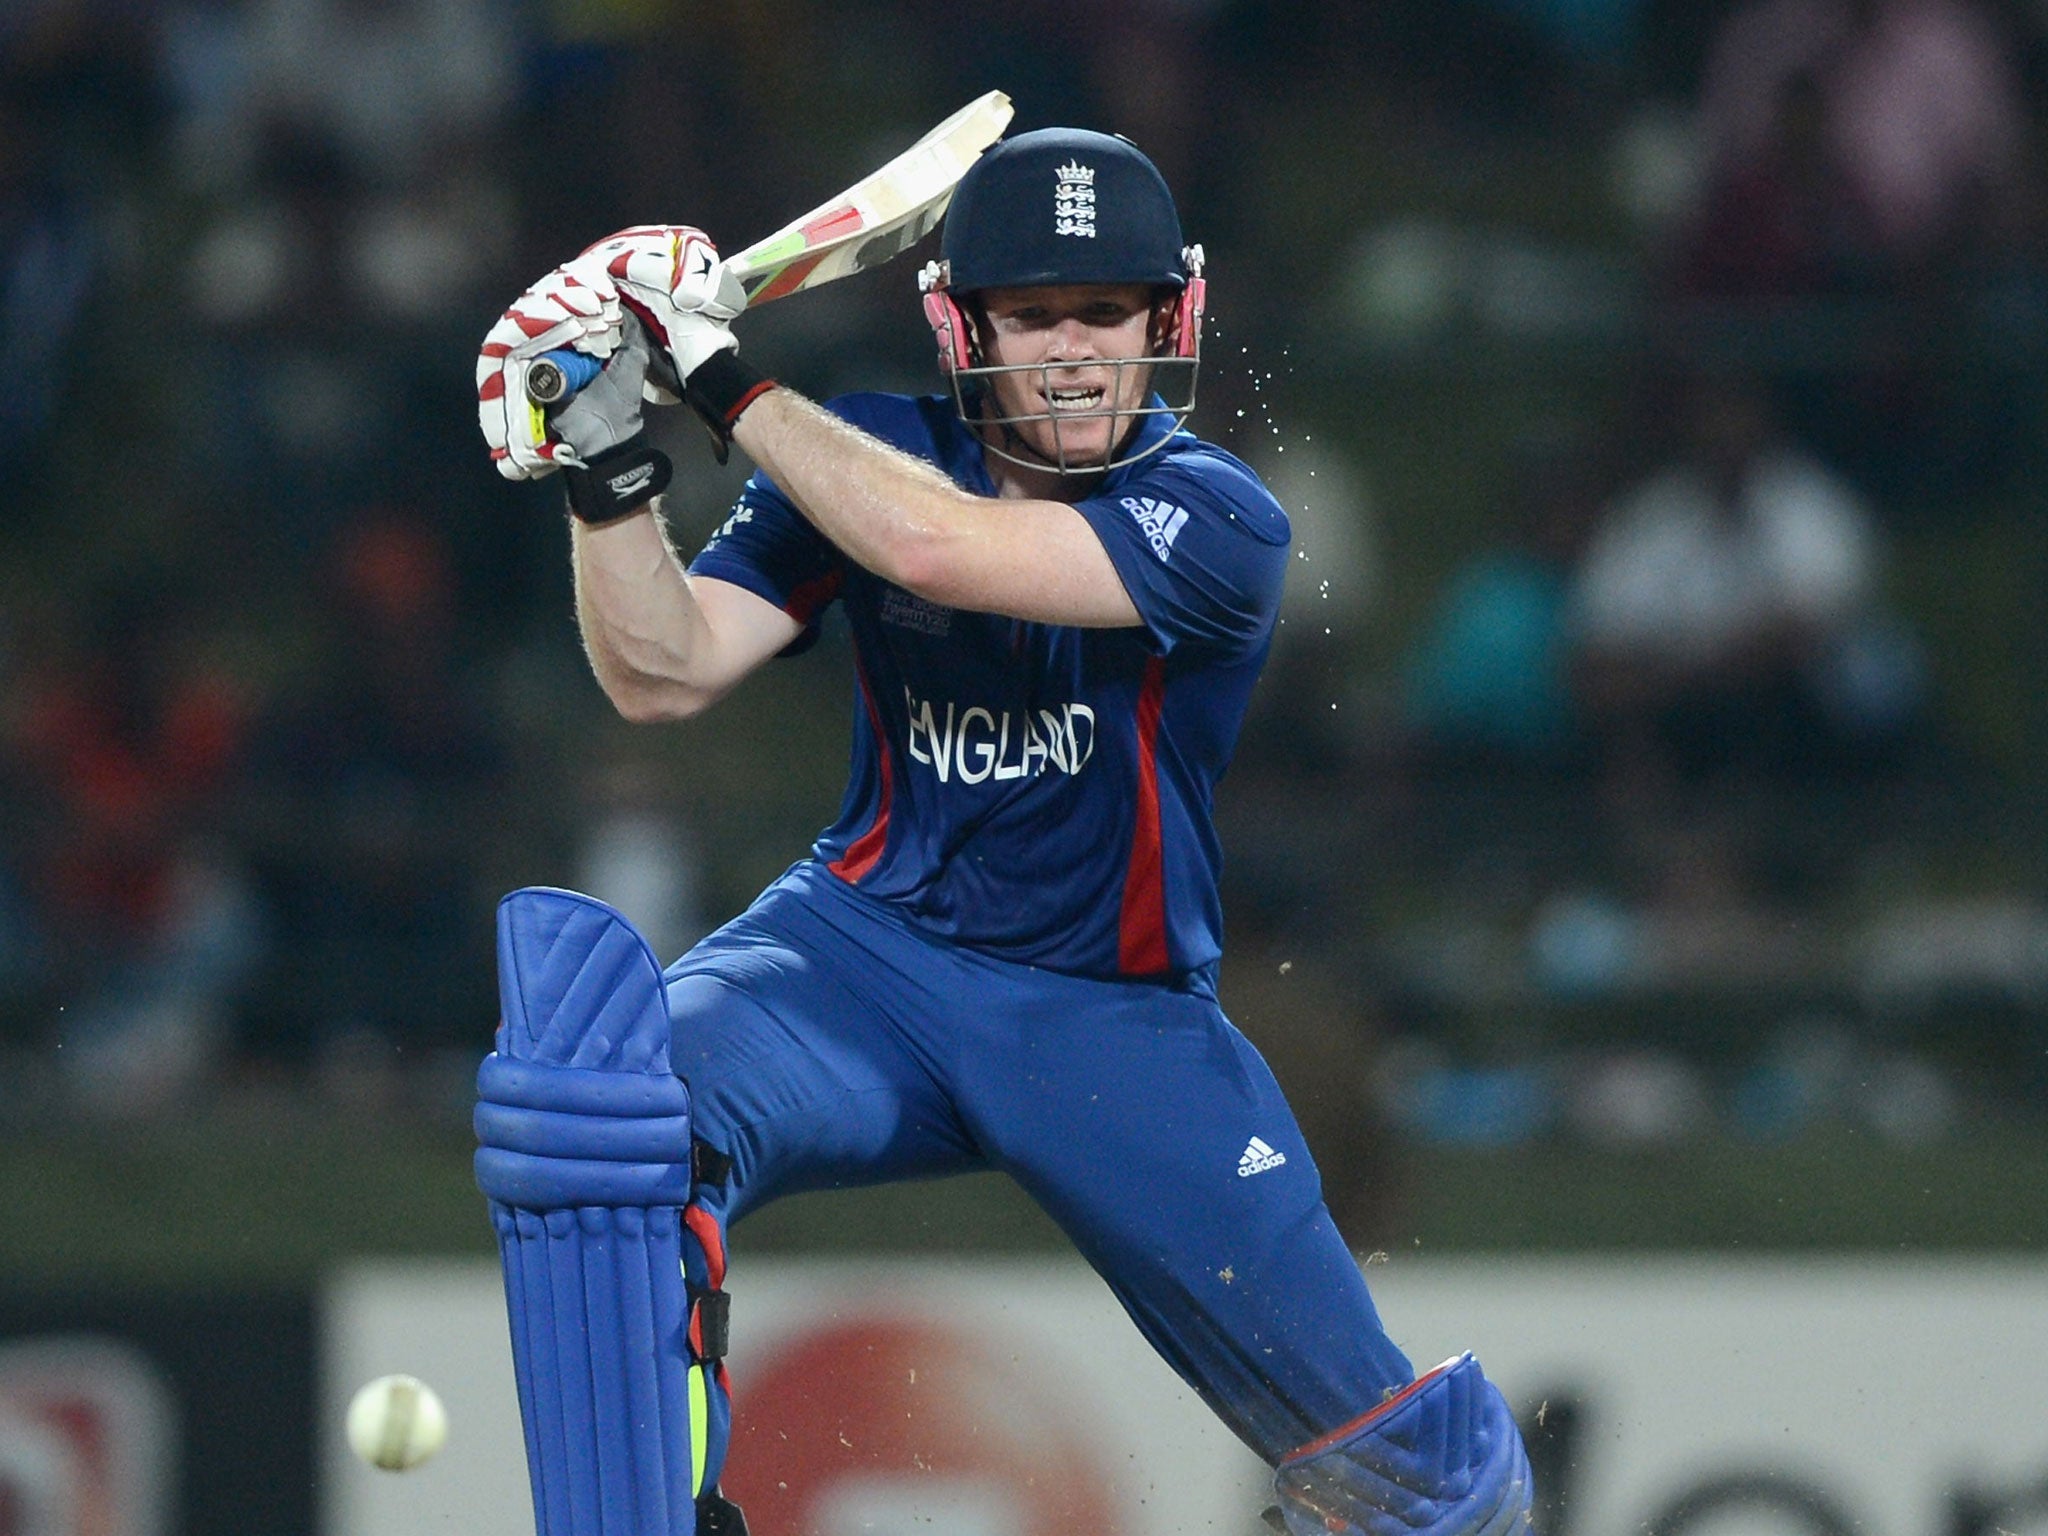 Captain’s knock: Eoin Morgan led his side home with an unbeaten 49